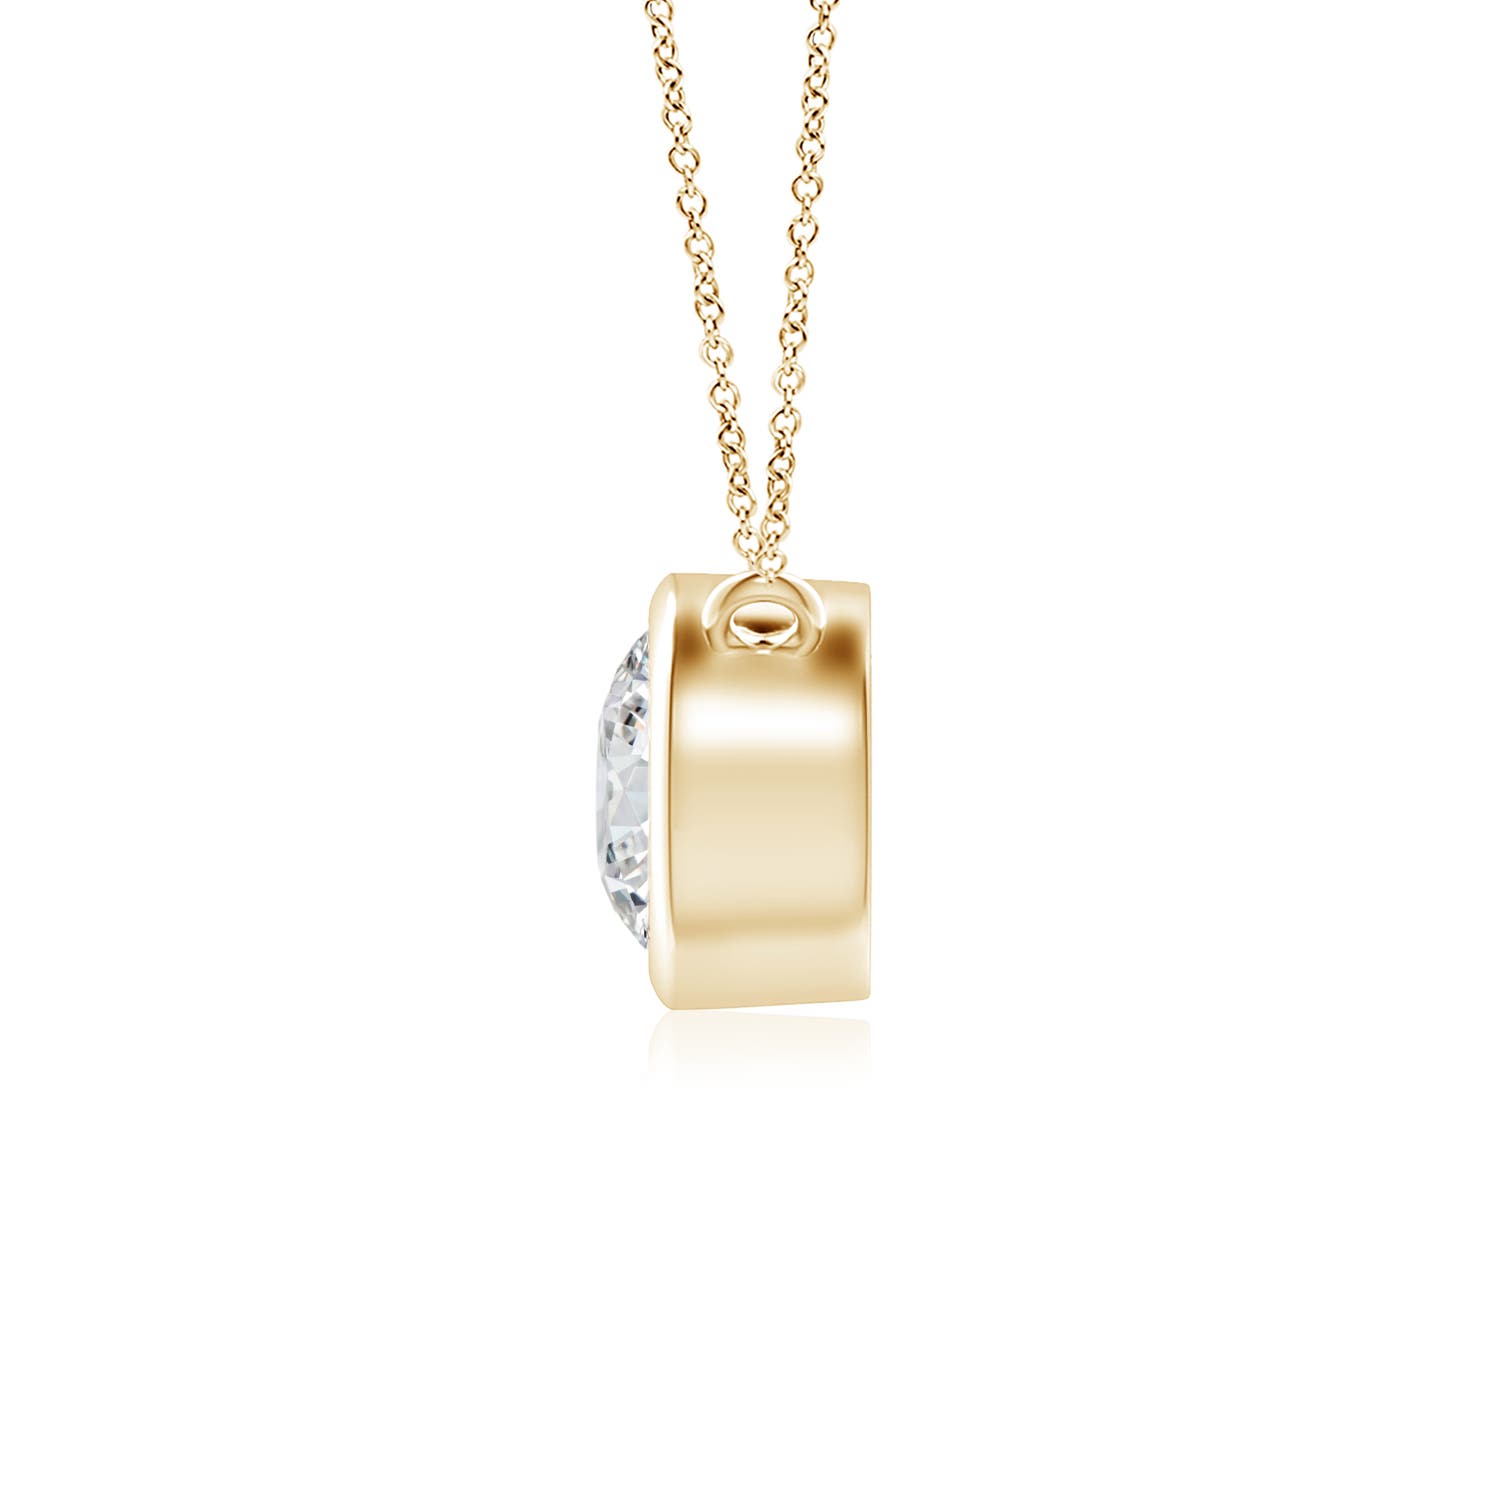 HSI2 / 0.33 CT / 14 KT Yellow Gold